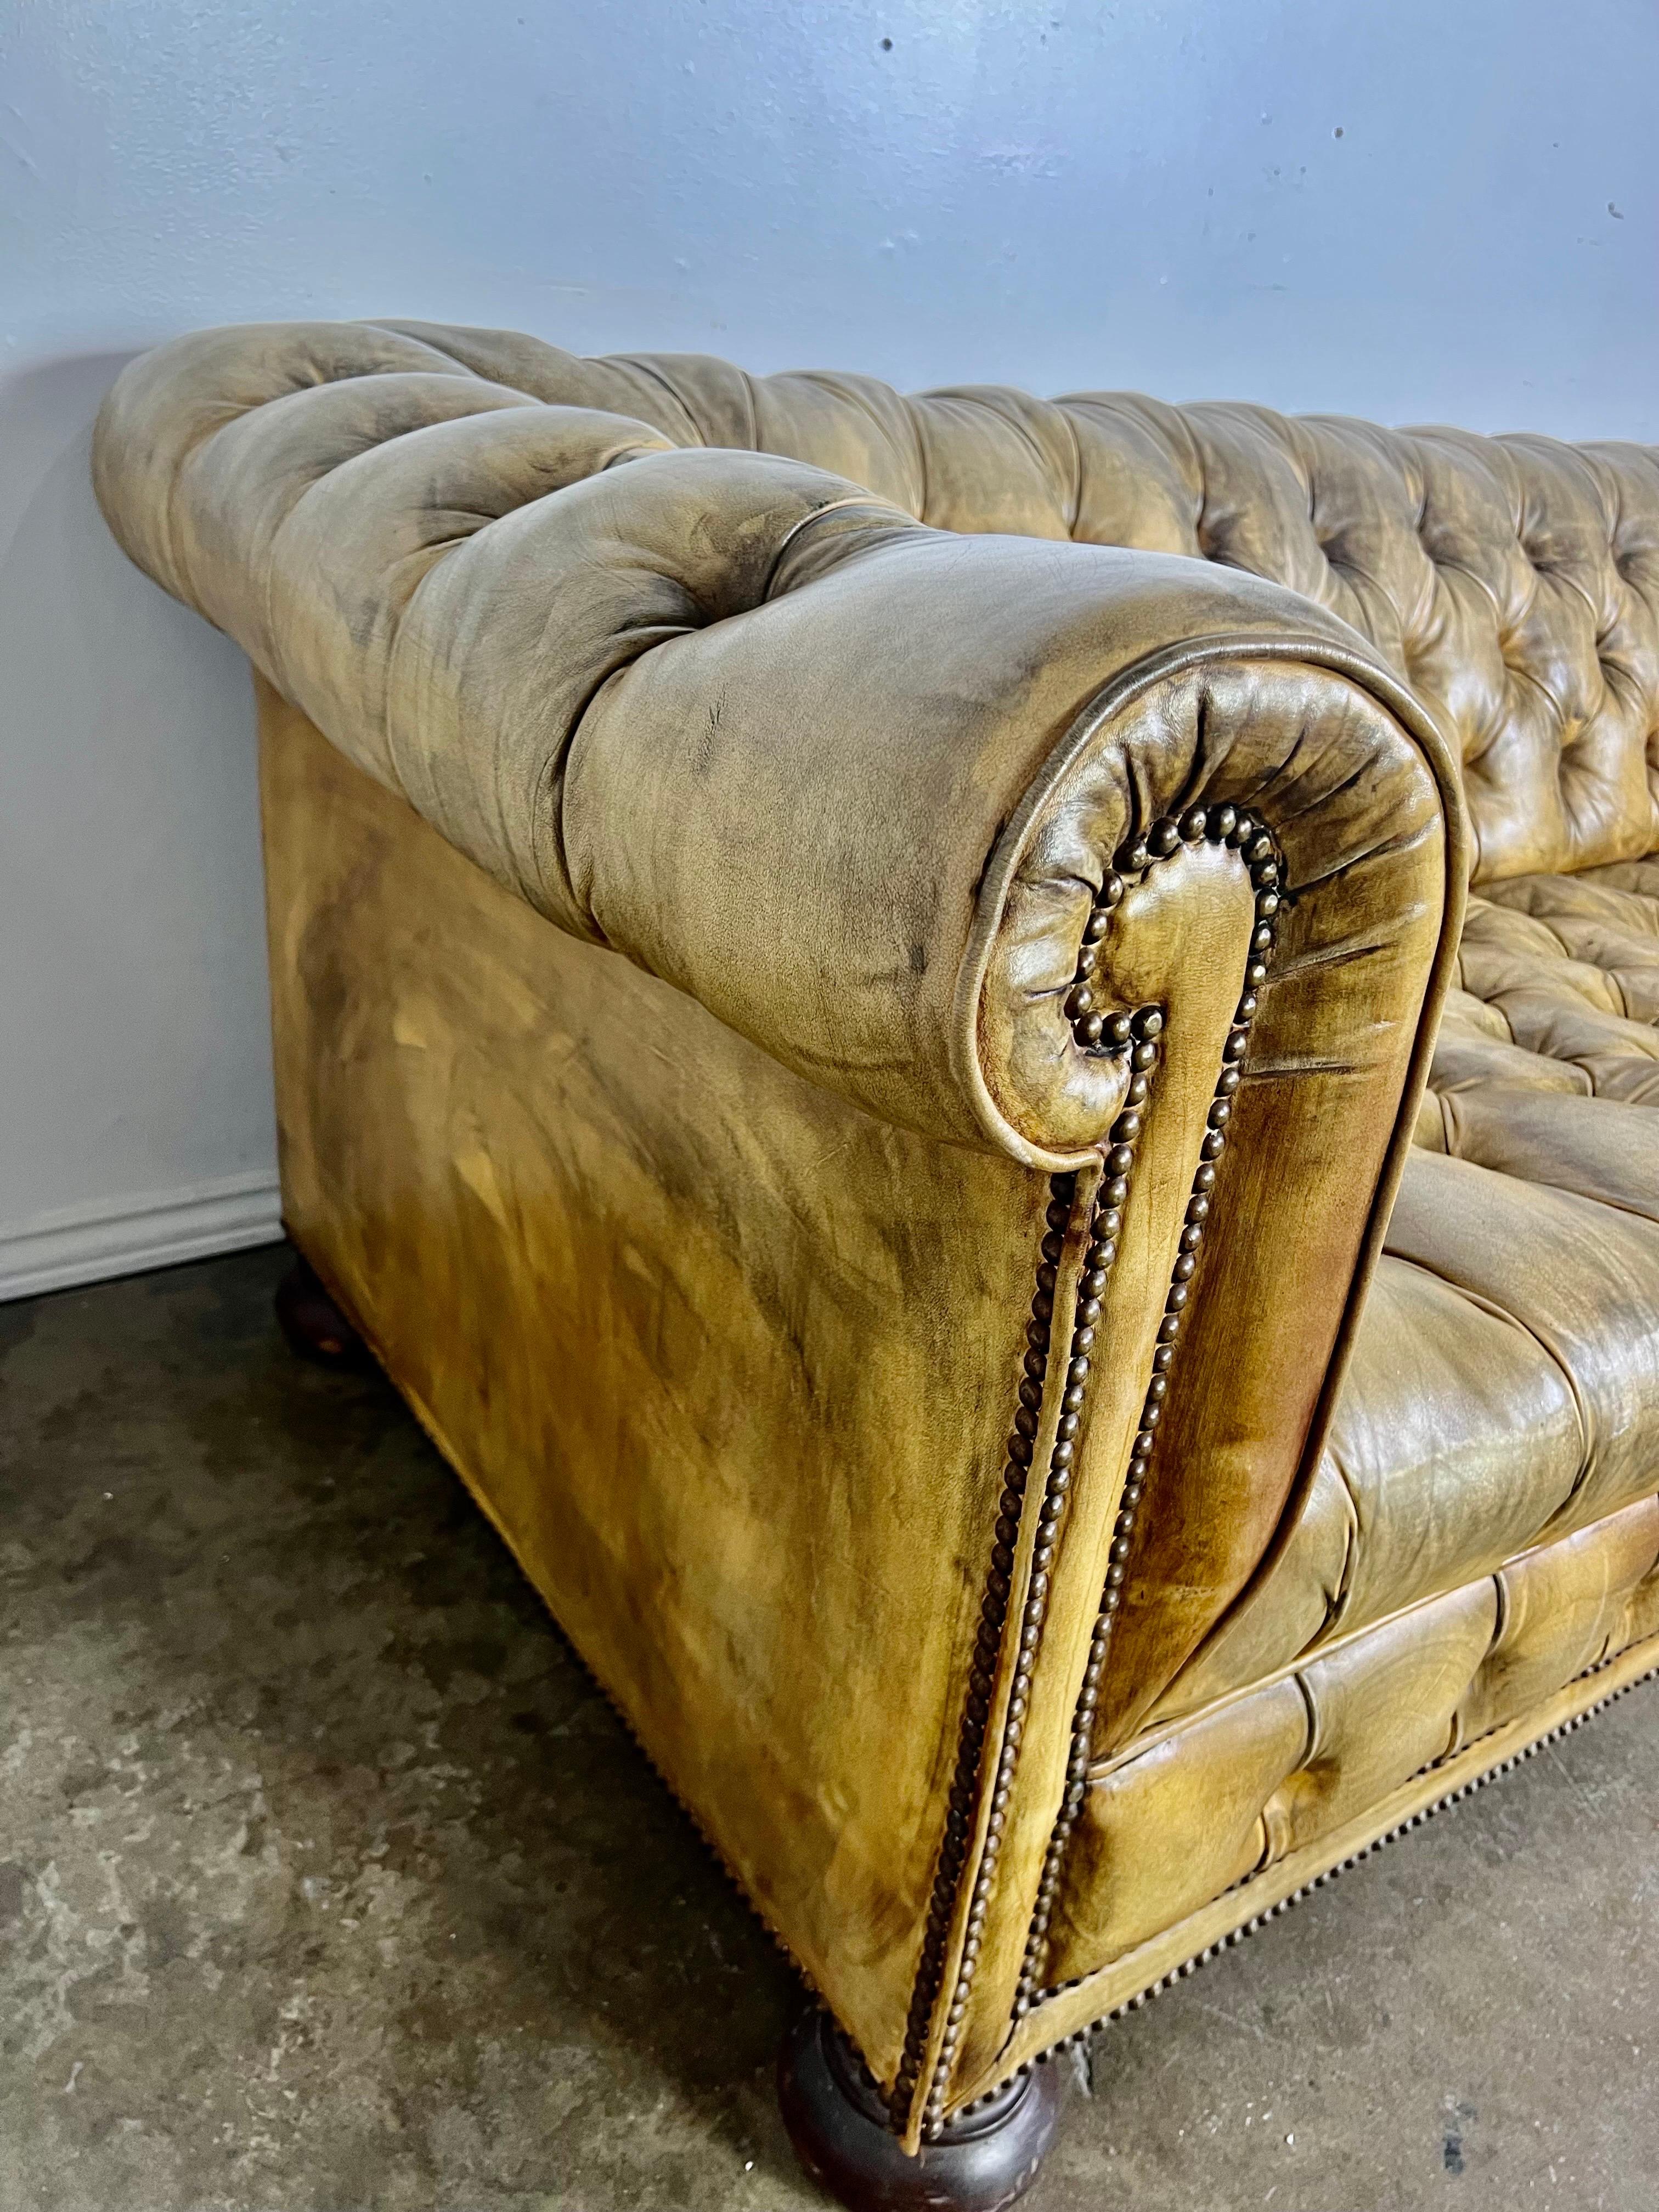 Vintage English Chesterfield Style Leather Tufted Sofa C. 1920's For Sale 8